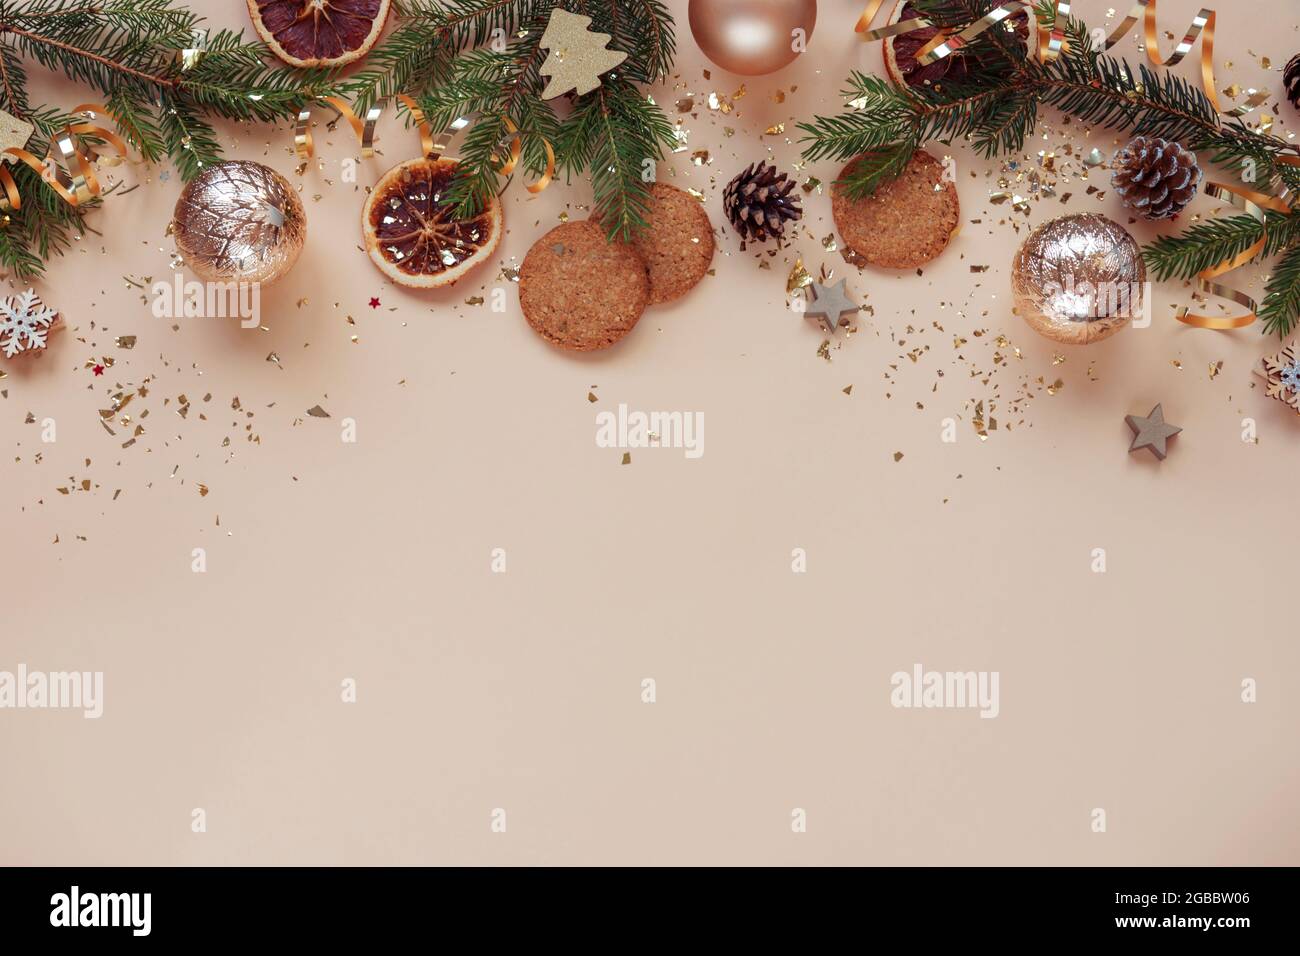 Christmas festive background. Christmas tree branches, balls, cookies and golden confetti on beige background. Top view, flat lay, copy space. Stock Photo